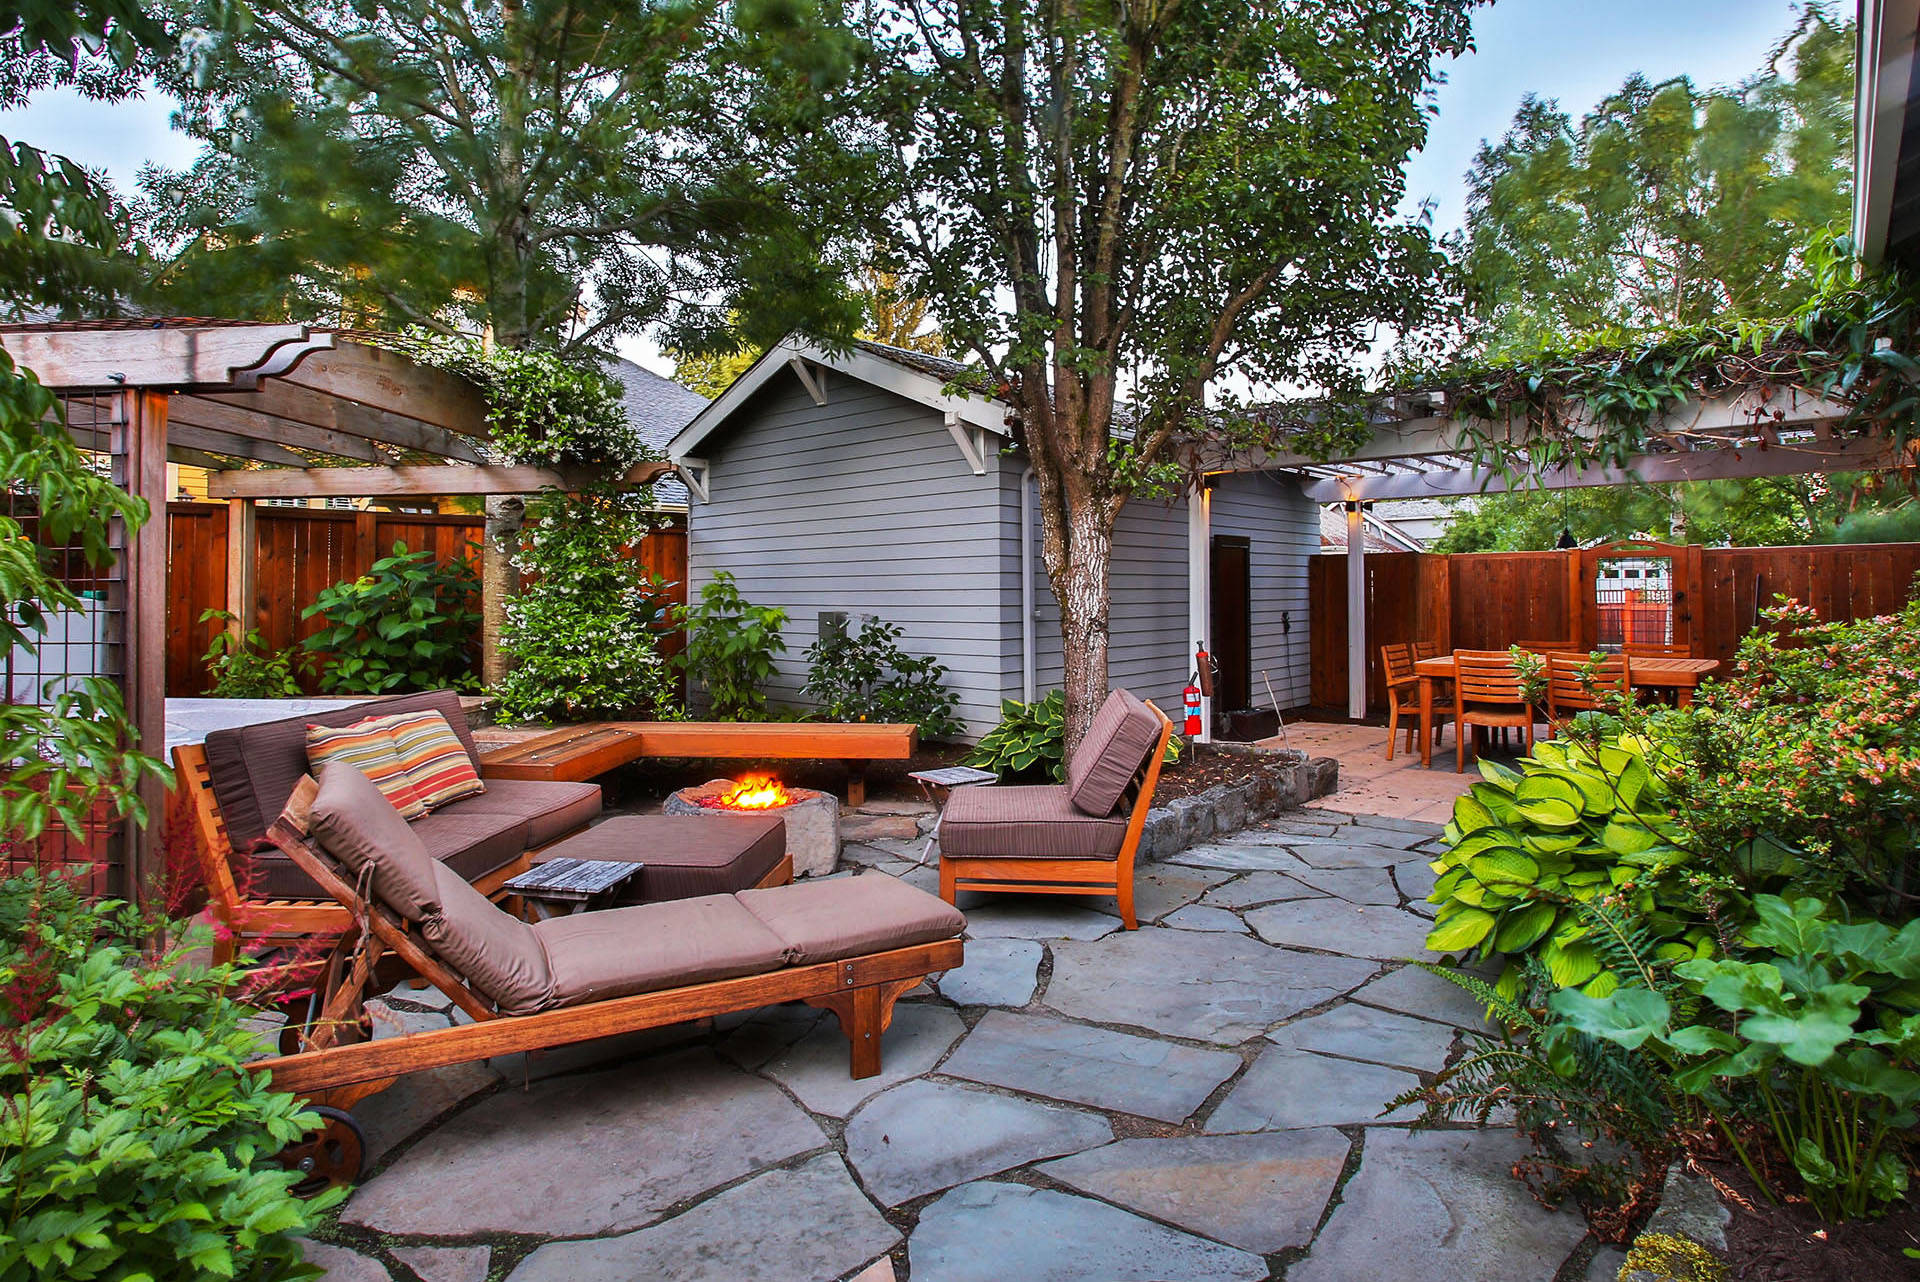 A warming fire structure extends the outdoor enjoyment of this beautiful hardscape.